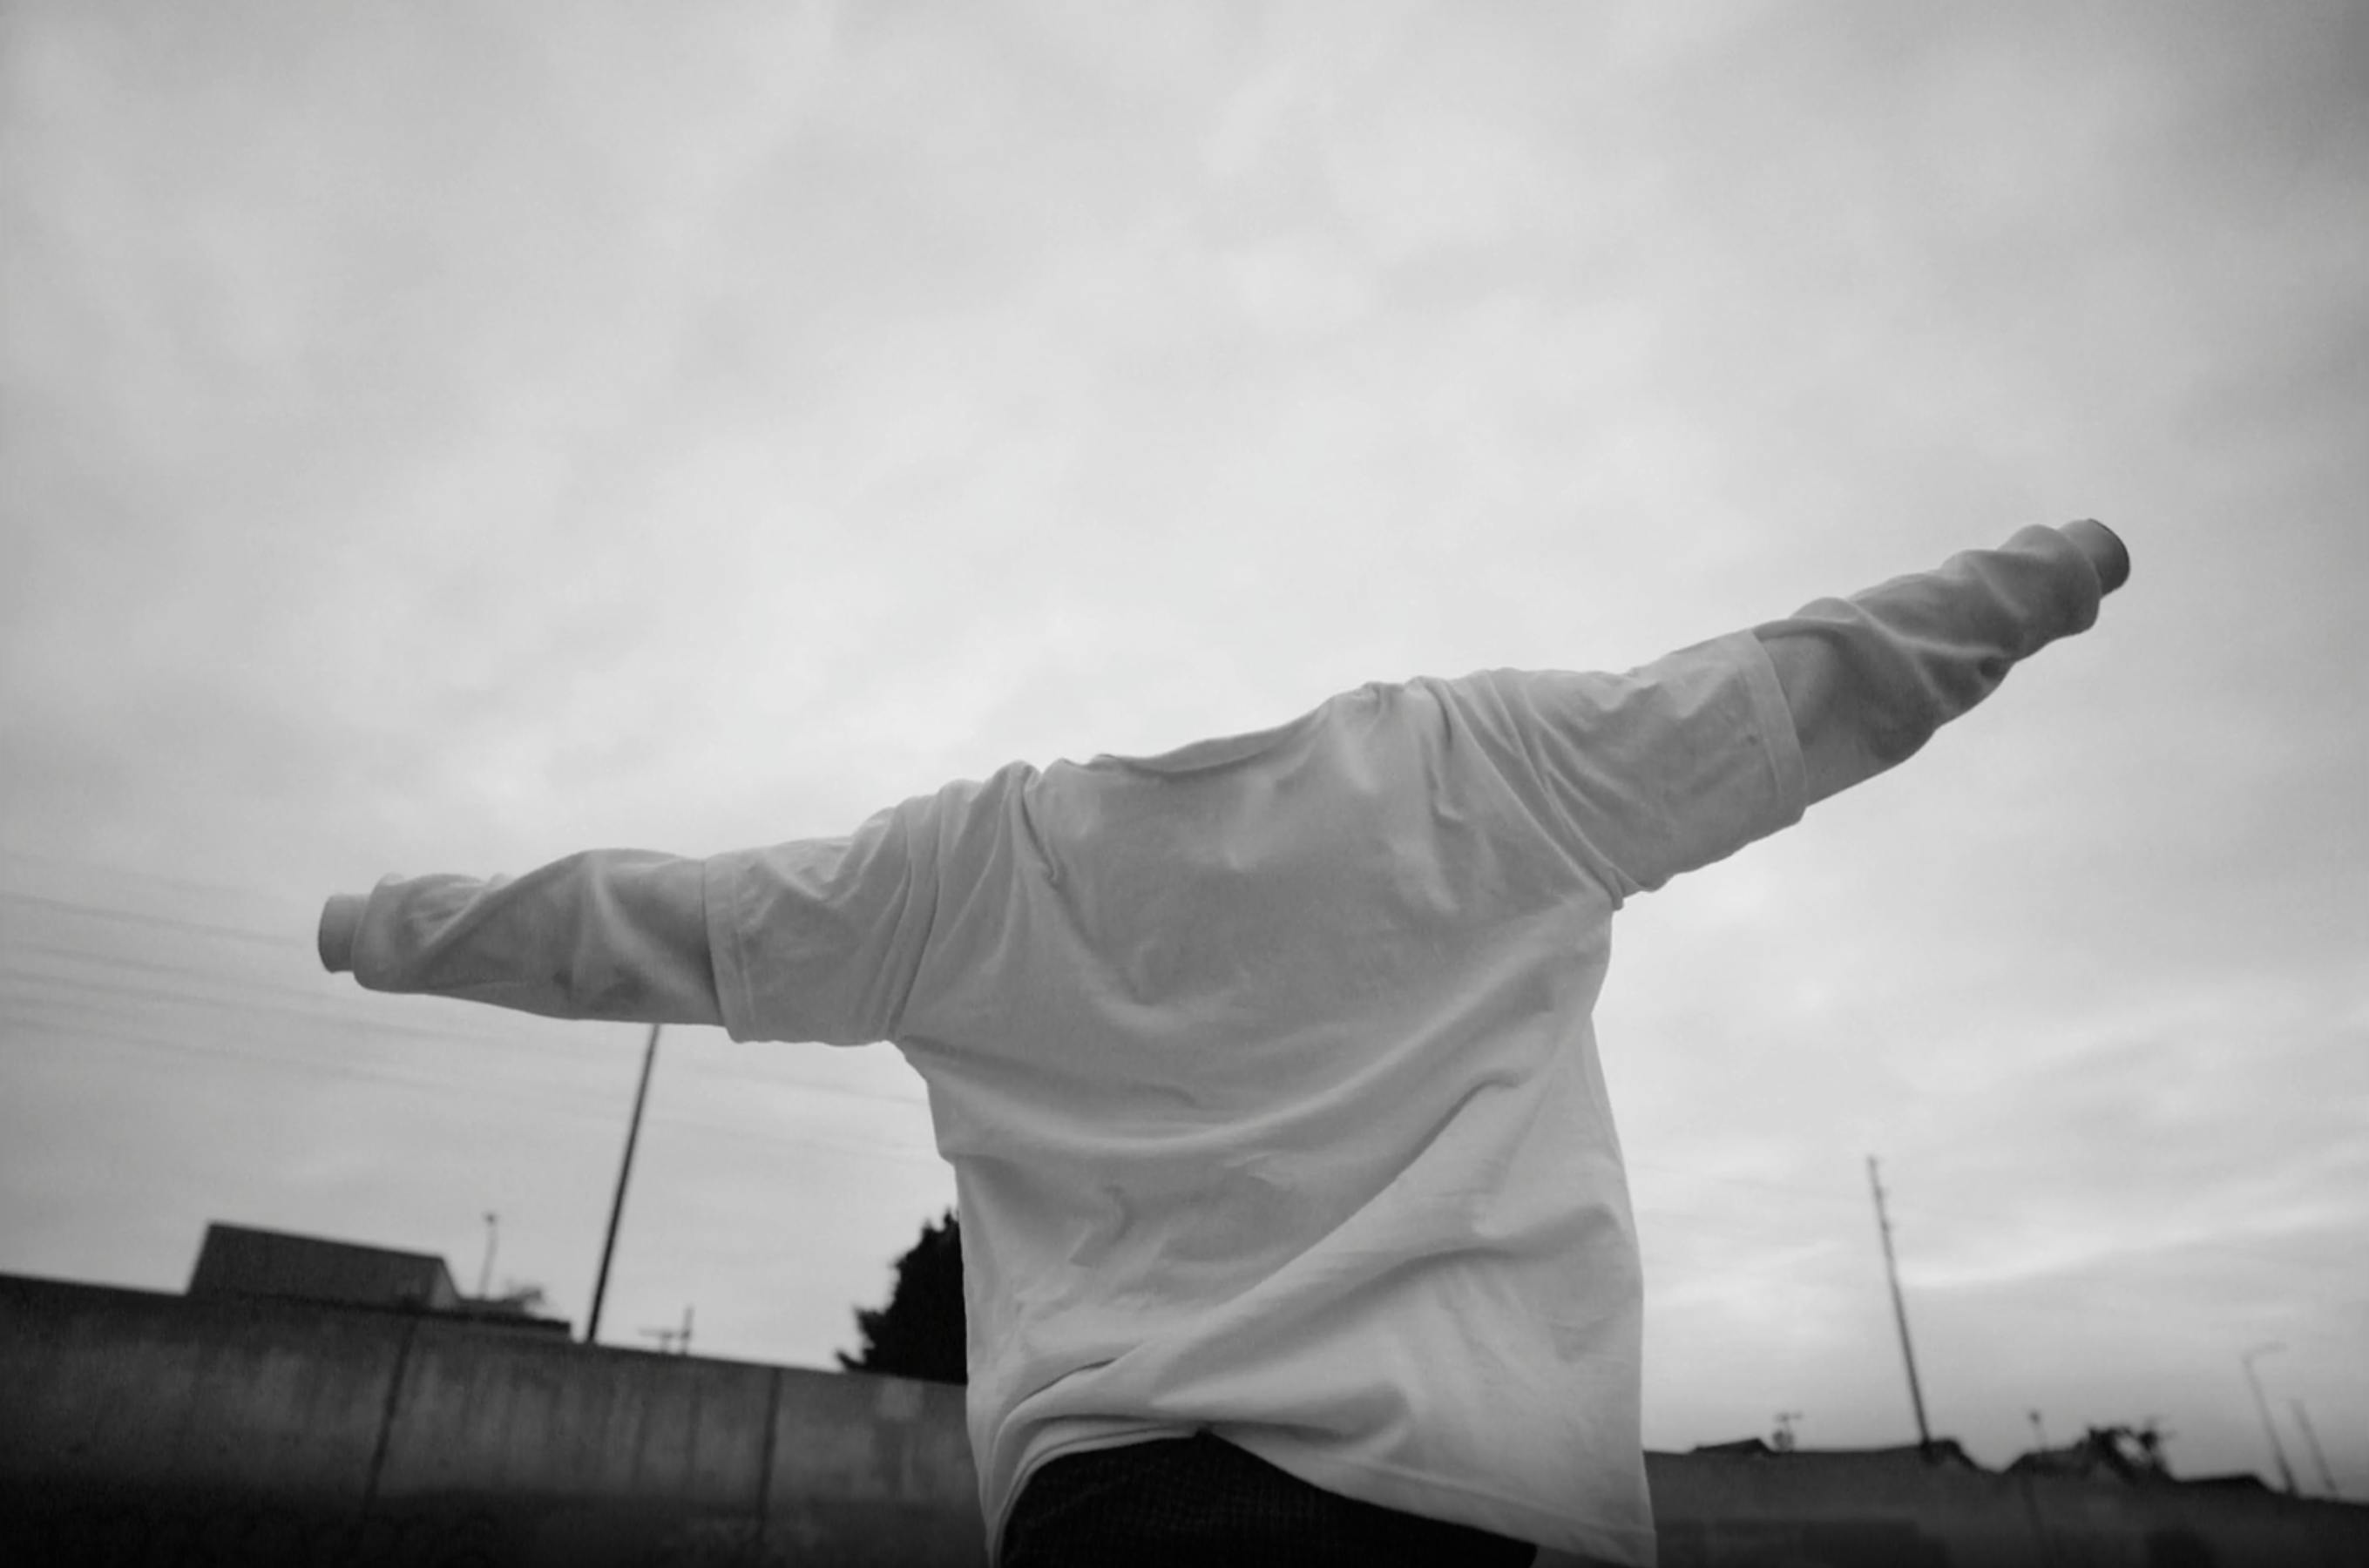 A black and white image of a person with their arms outstretched, but the person is invisible